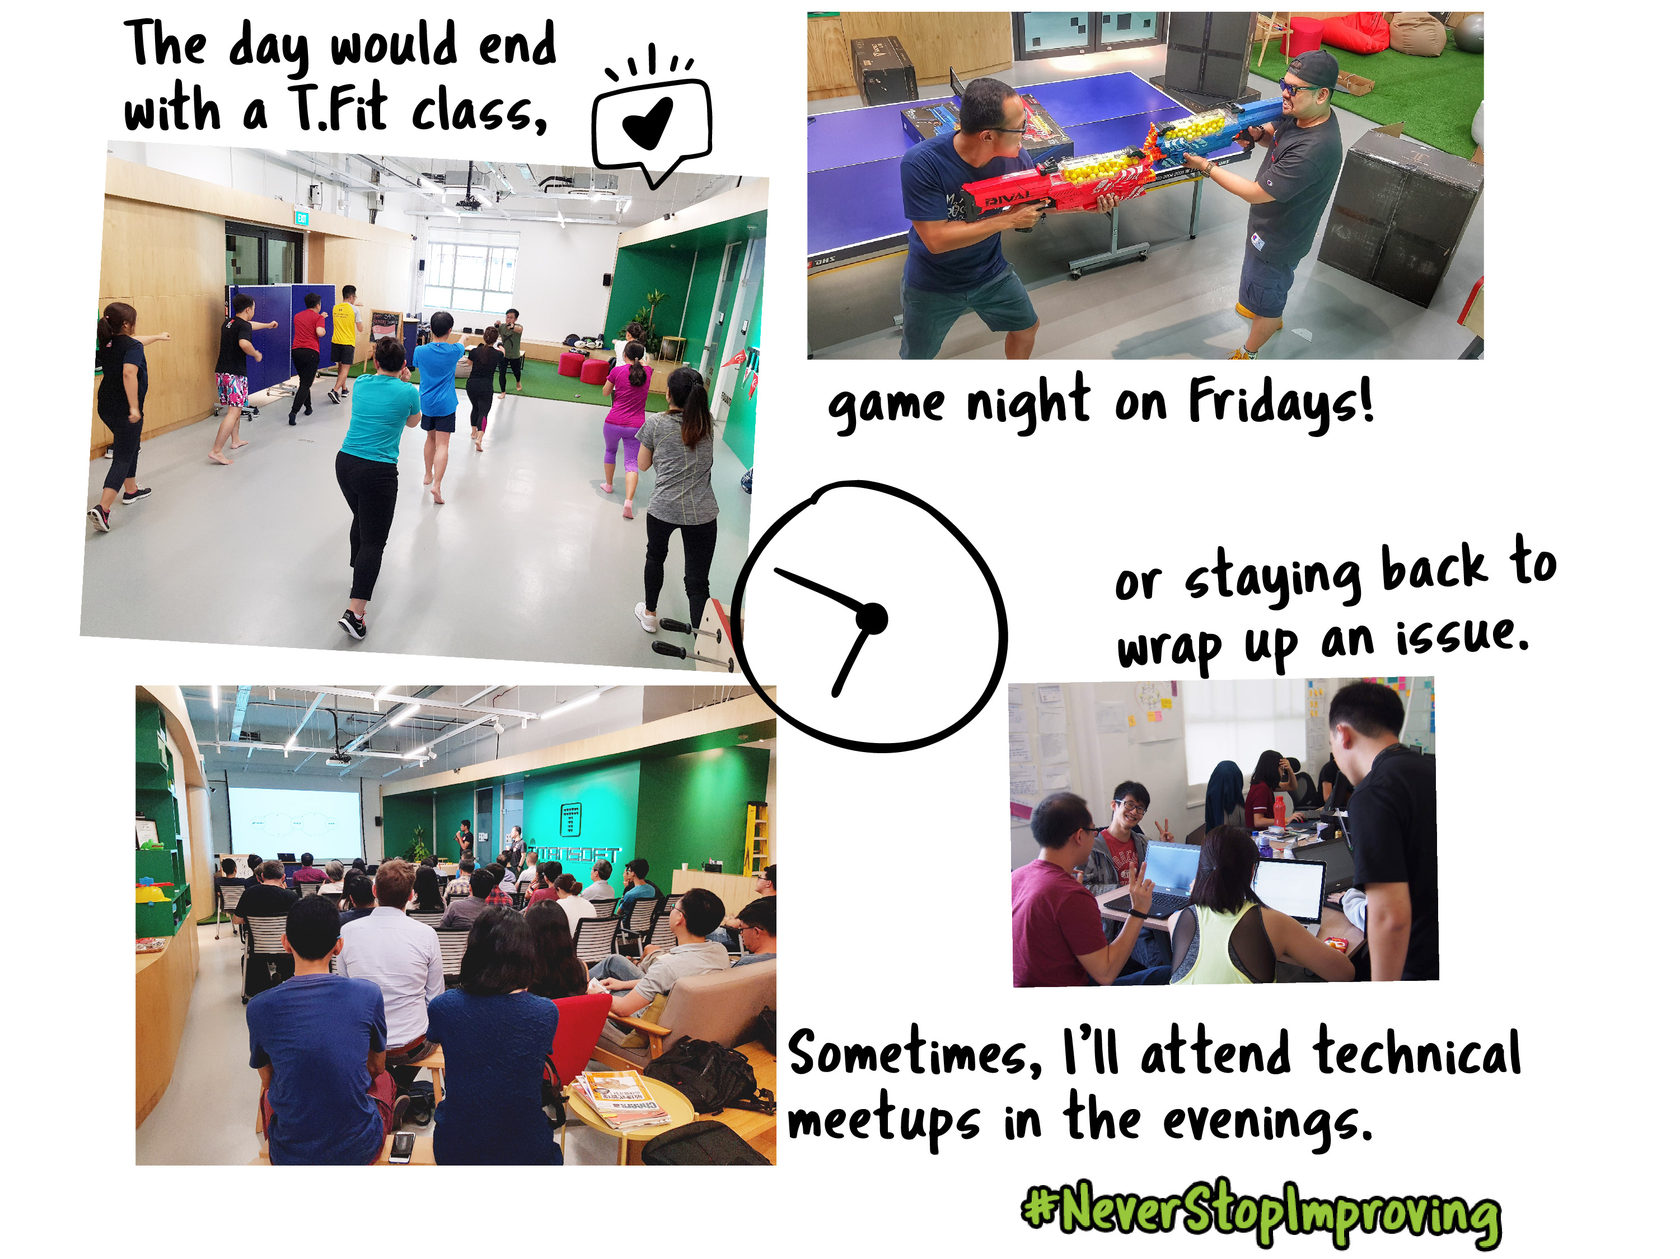 The day would end with a T.Fit class, game night on Fridays, or staying back to wrap up a problem. Sometimes I’ll attend a technical meetup in the evenings. #NeverStopImproving